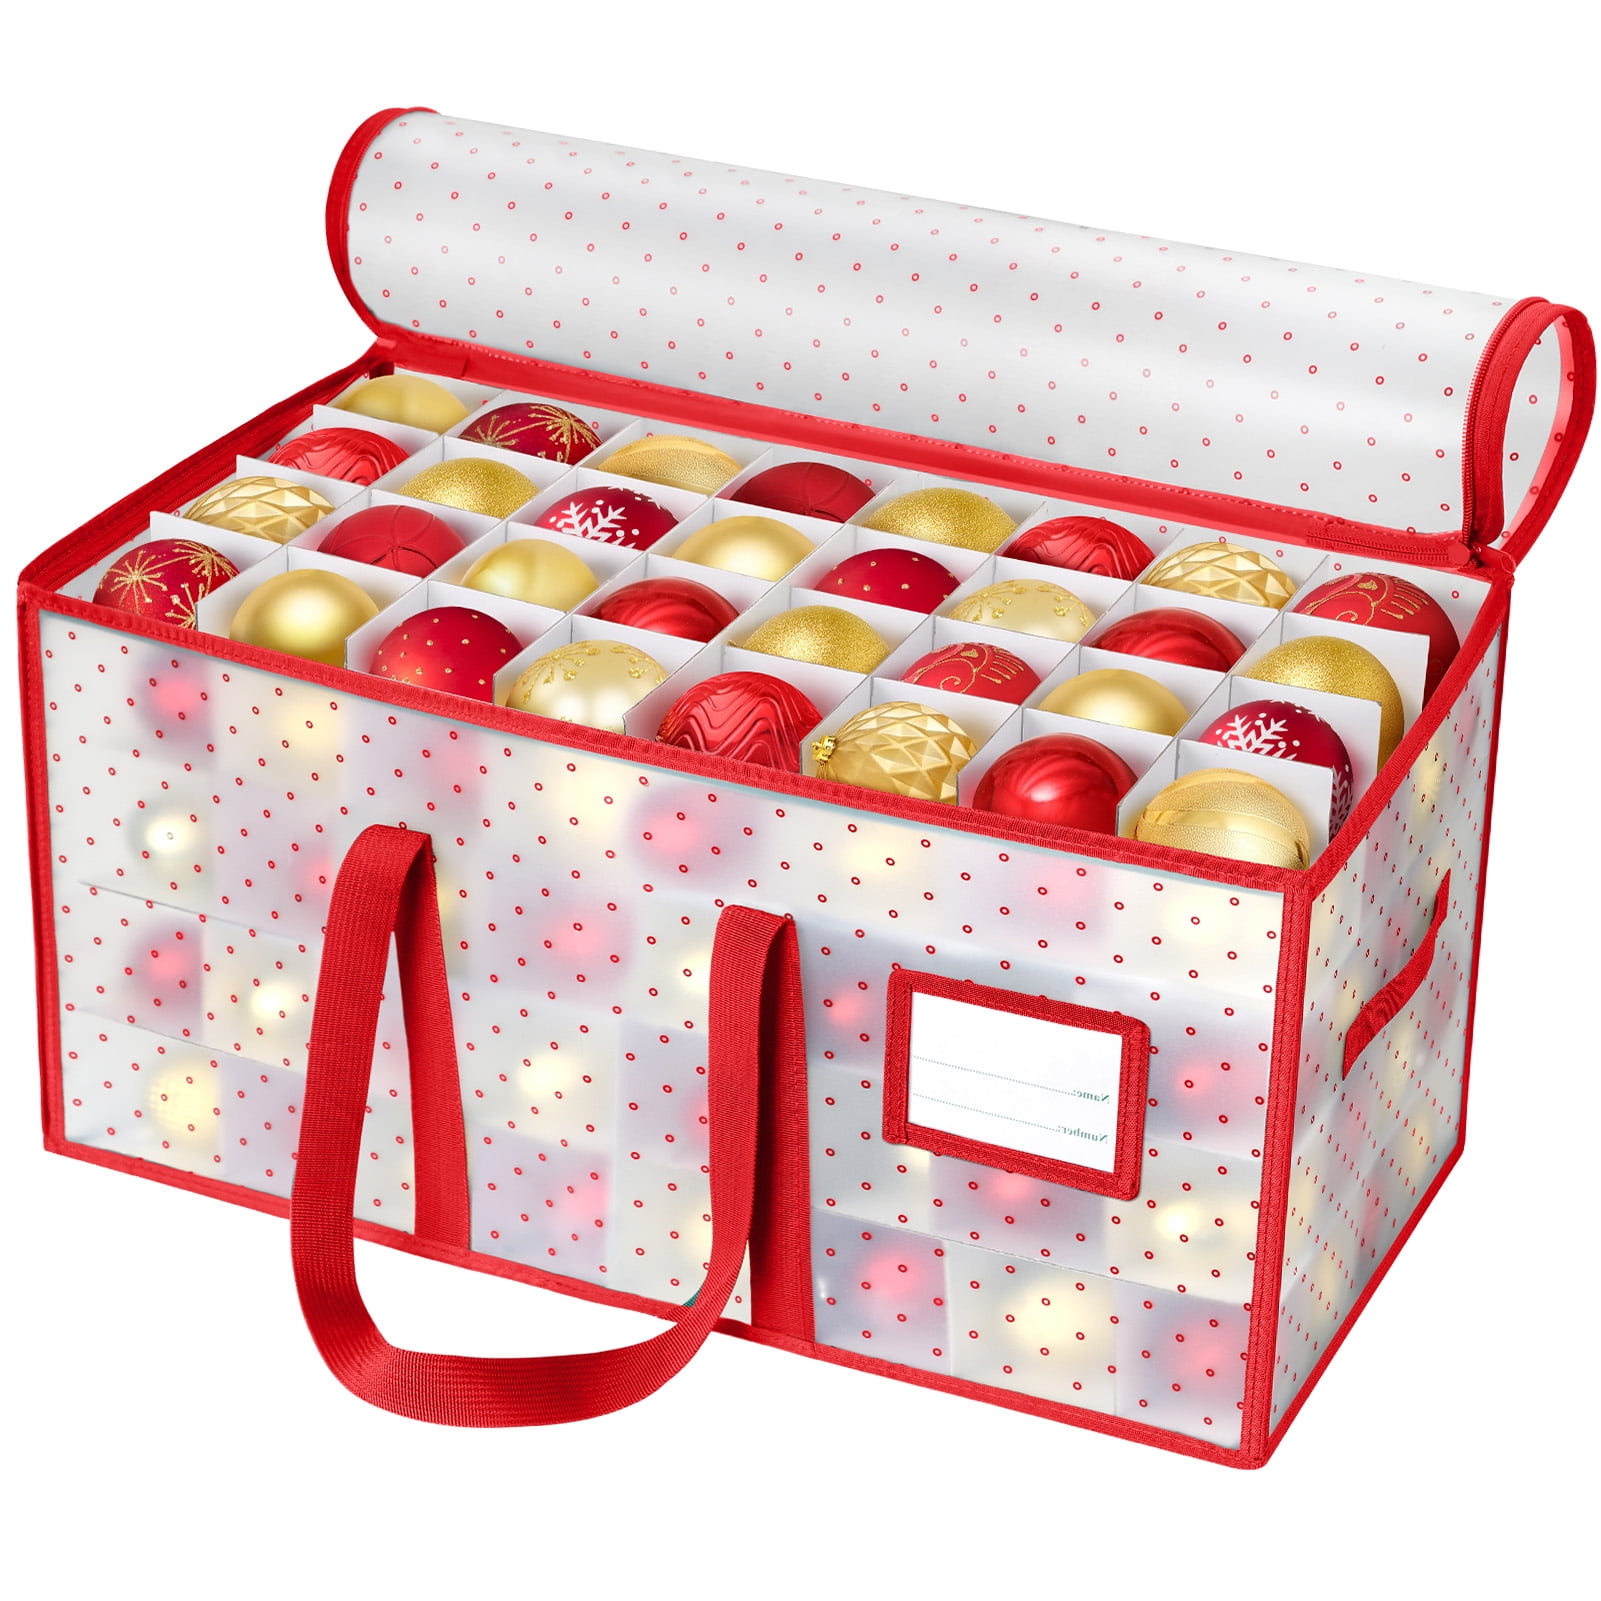 ZOBER Christmas Ornament Storage Box - Stores 128 Ornaments W/ 2 Sided  Zipper - Flexible Plastic Christmas Ornament Storage Containers - 3 Inch  Cube